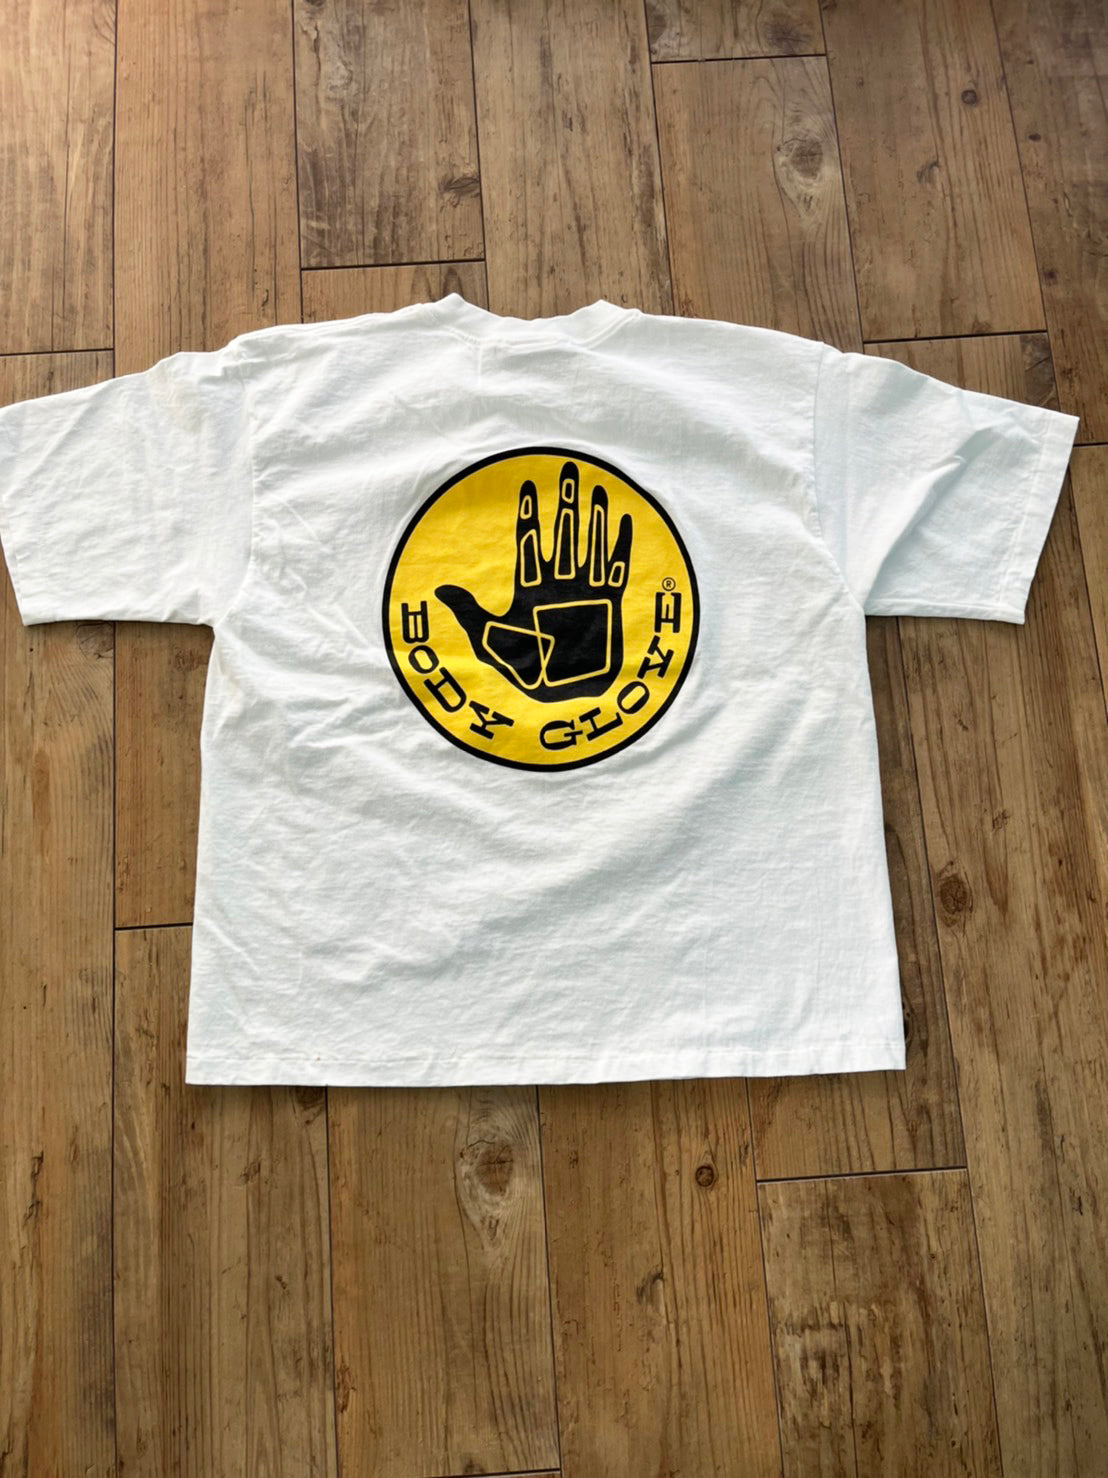 BODY GLOVE】Dead Stock/one wash 80's vintage Big Logo T-shirt Made